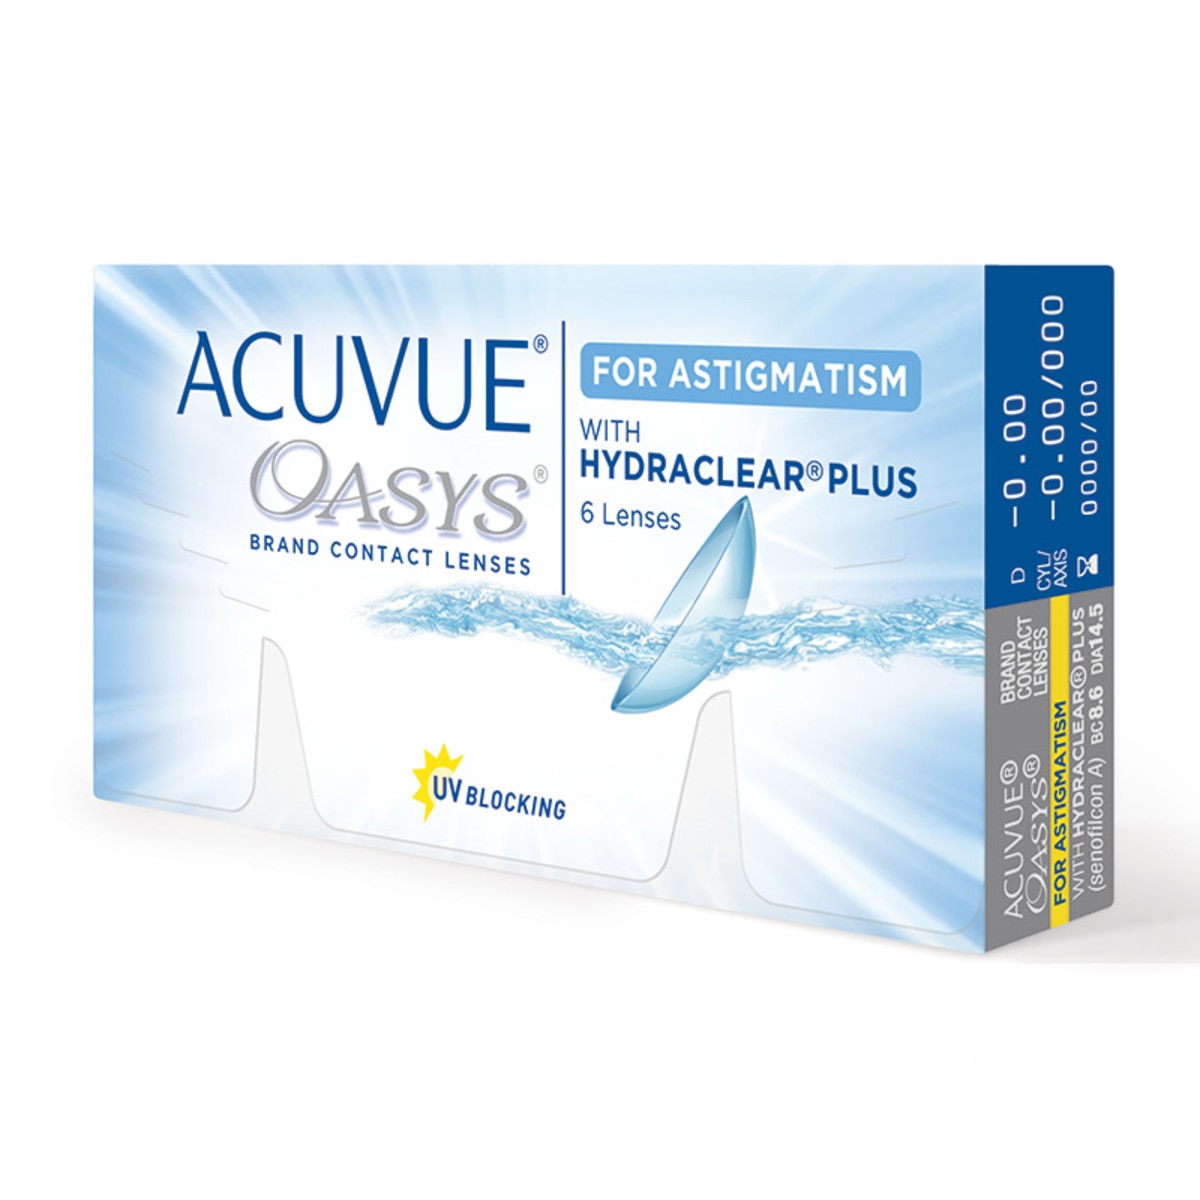 ACUVUE OASYS® con HYDRACLEAR Plus® para Astigmatismo (D -7.5, Cyl/Axis -1.75/80)